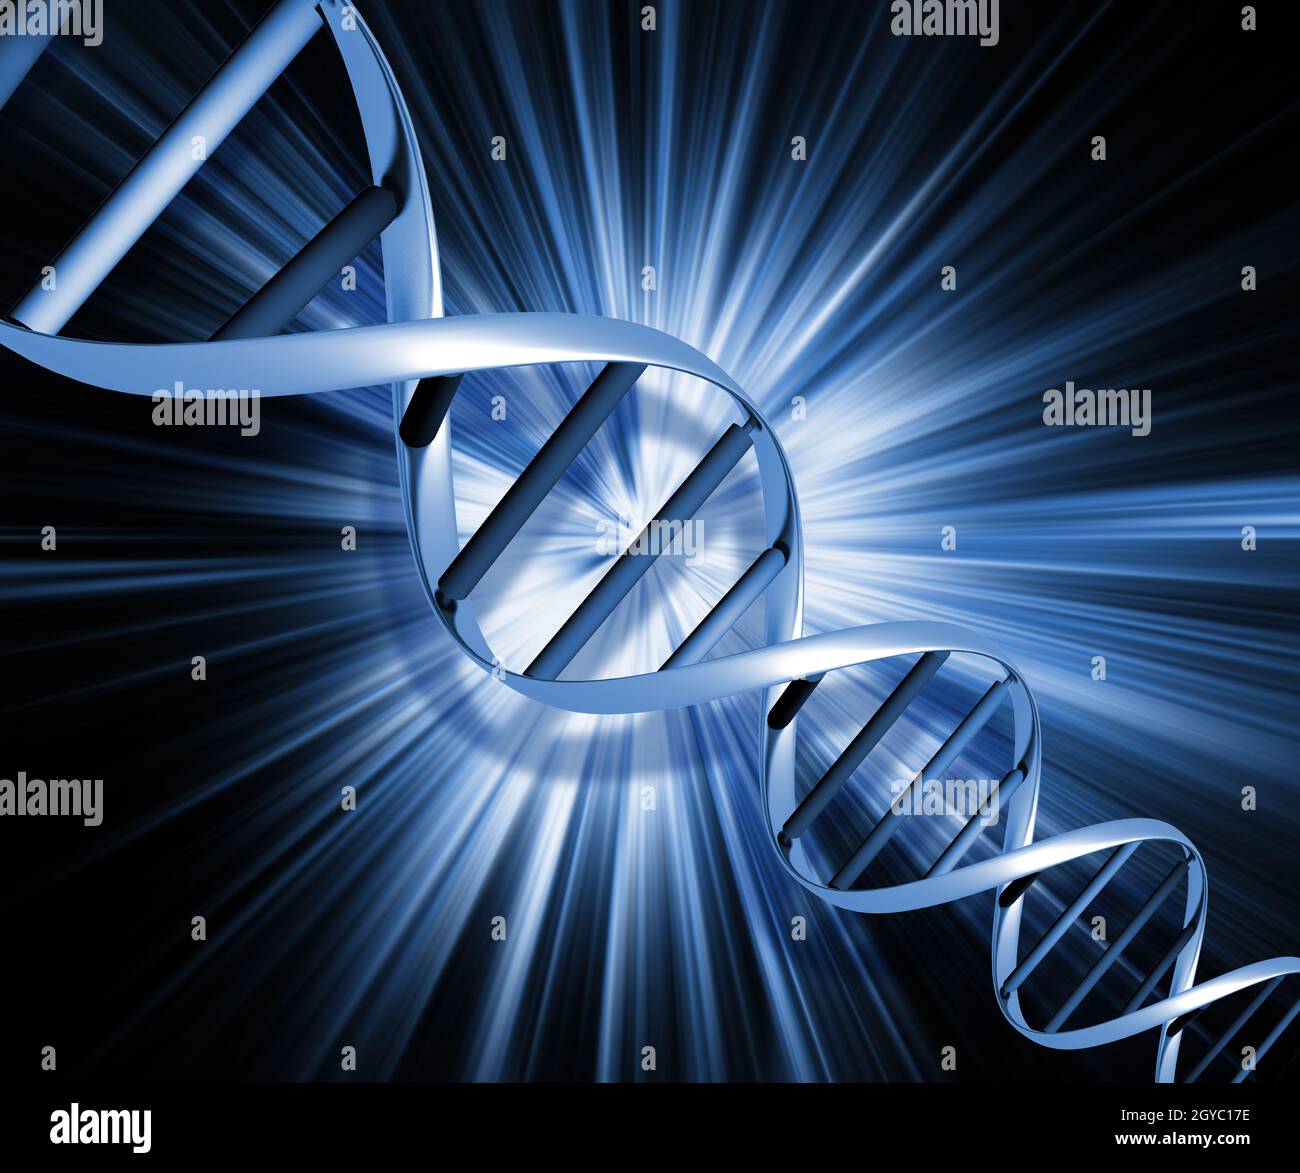 DNA strands on abstract background Stock Photo